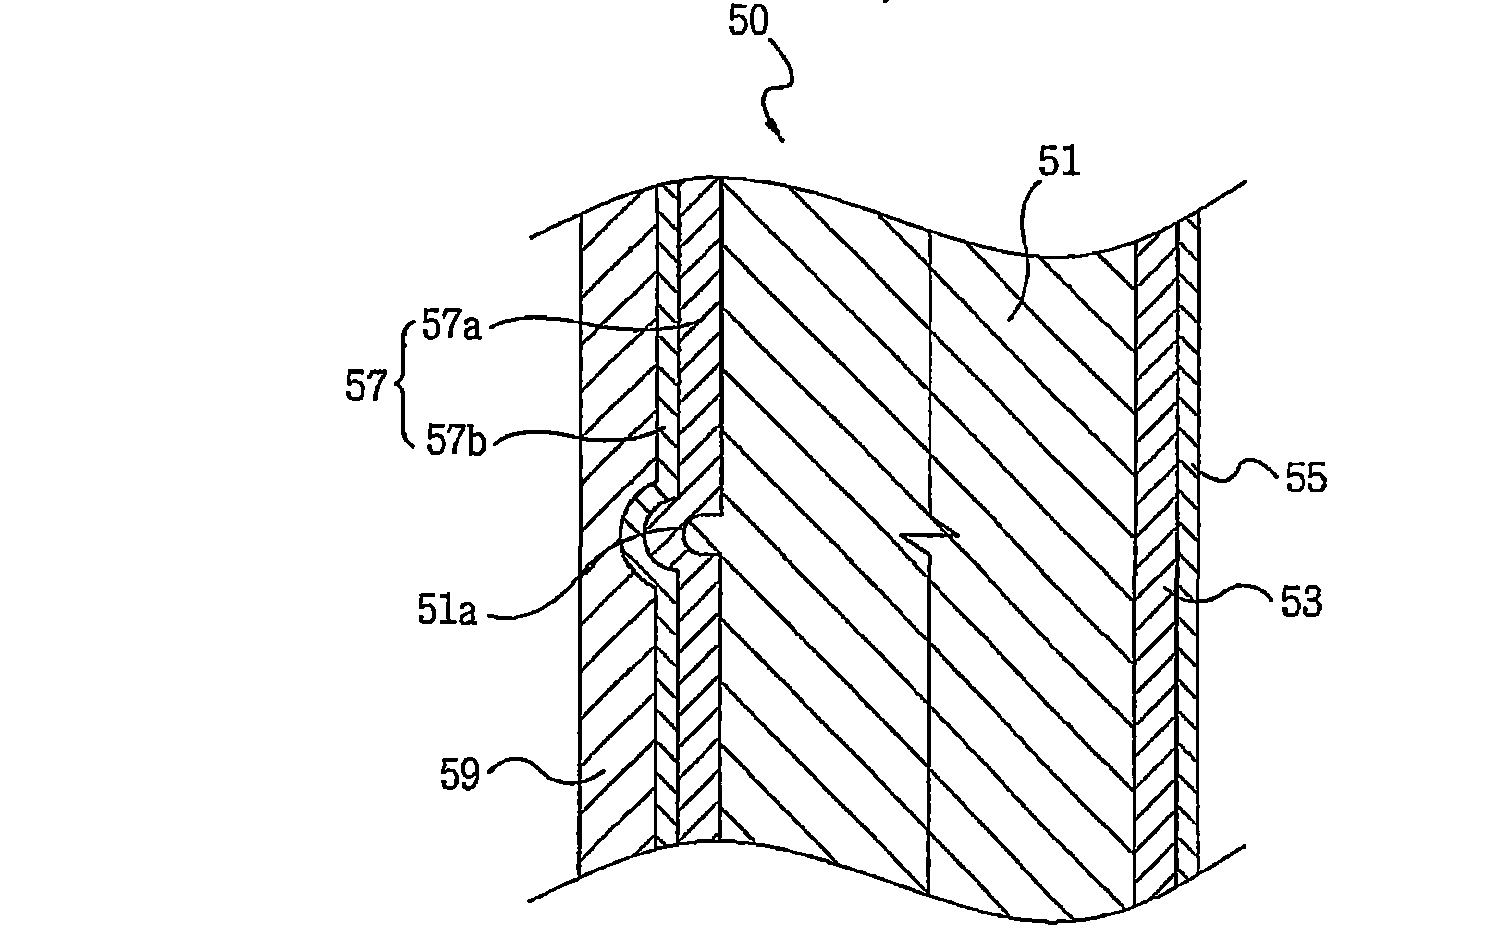 An outcase of refrigerator and method for manufacturing the same